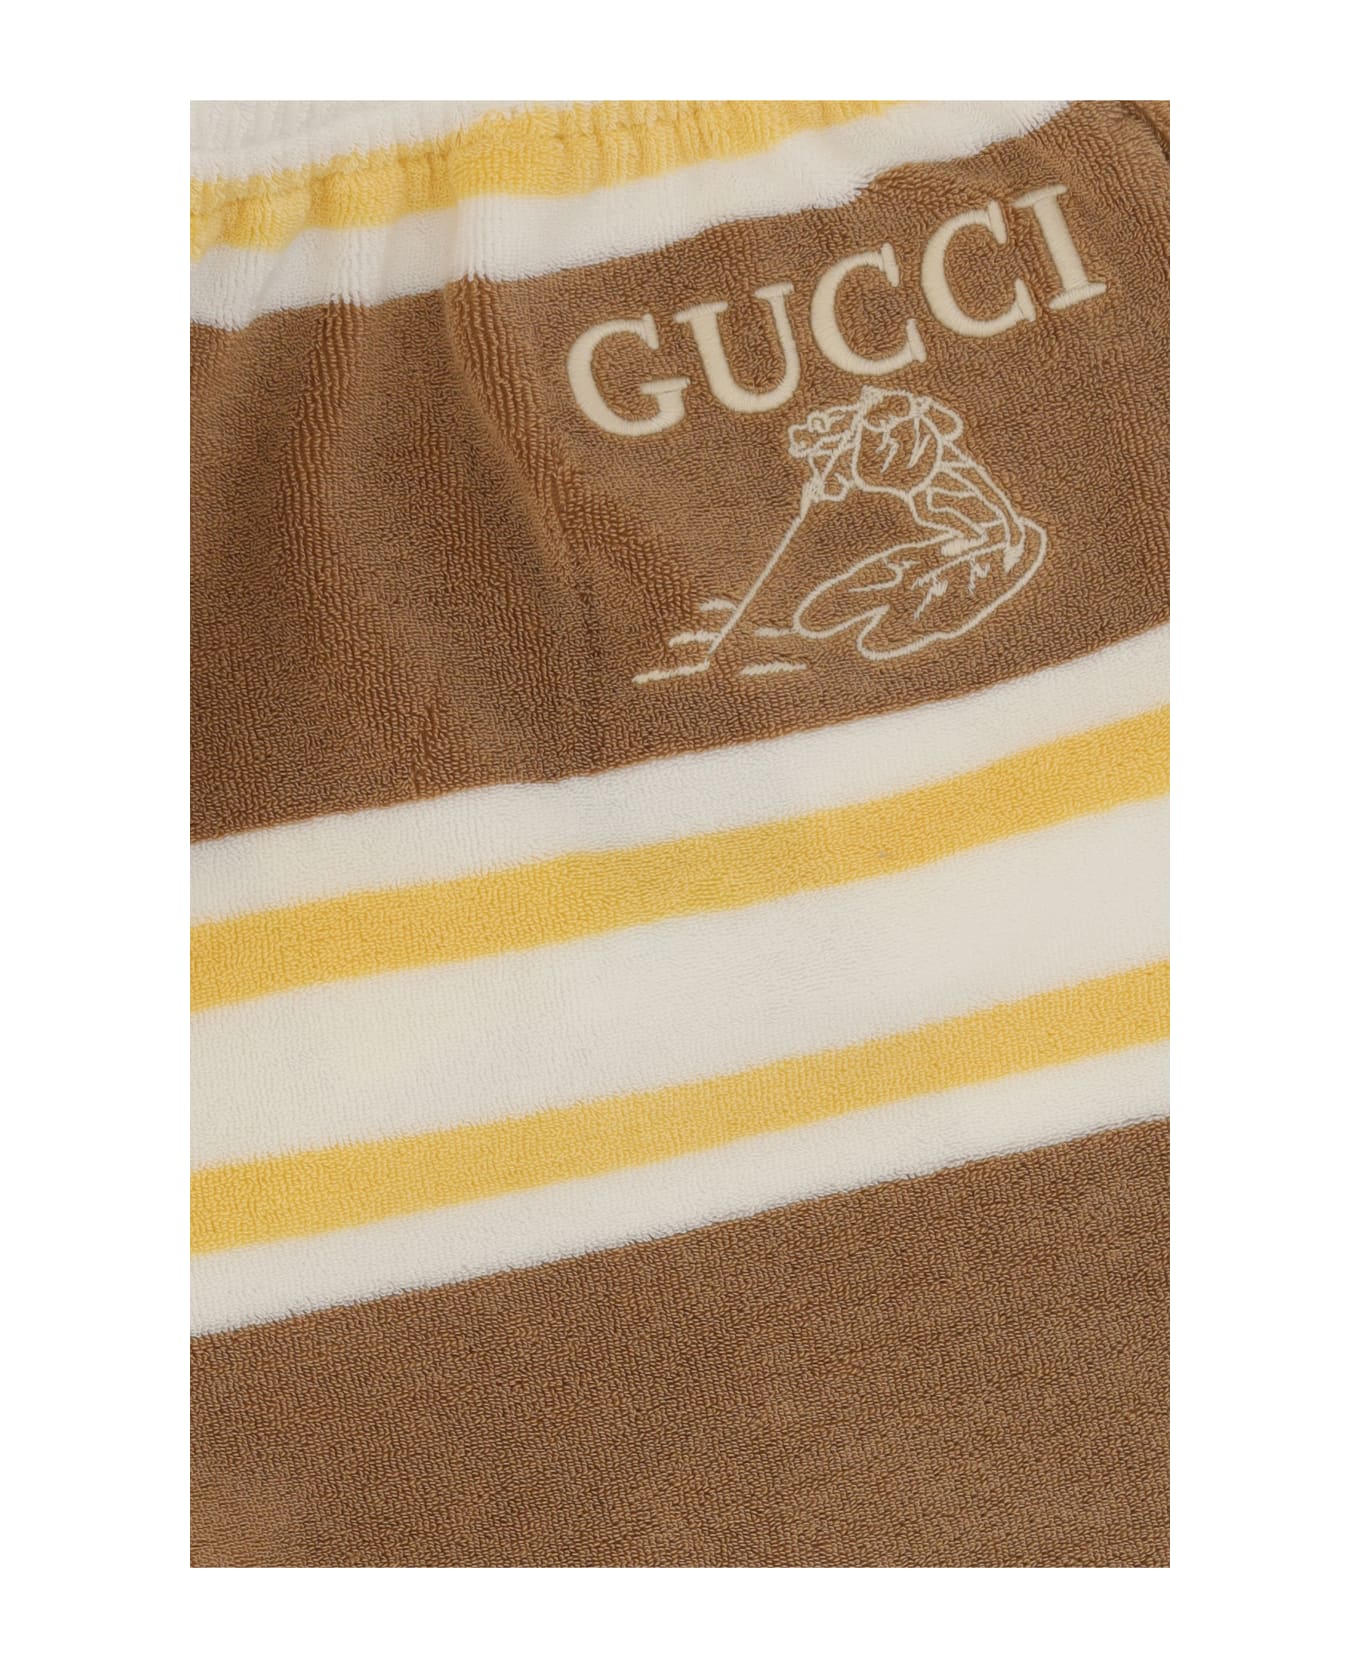 Gucci Shorts For Boy - Yellow/brown